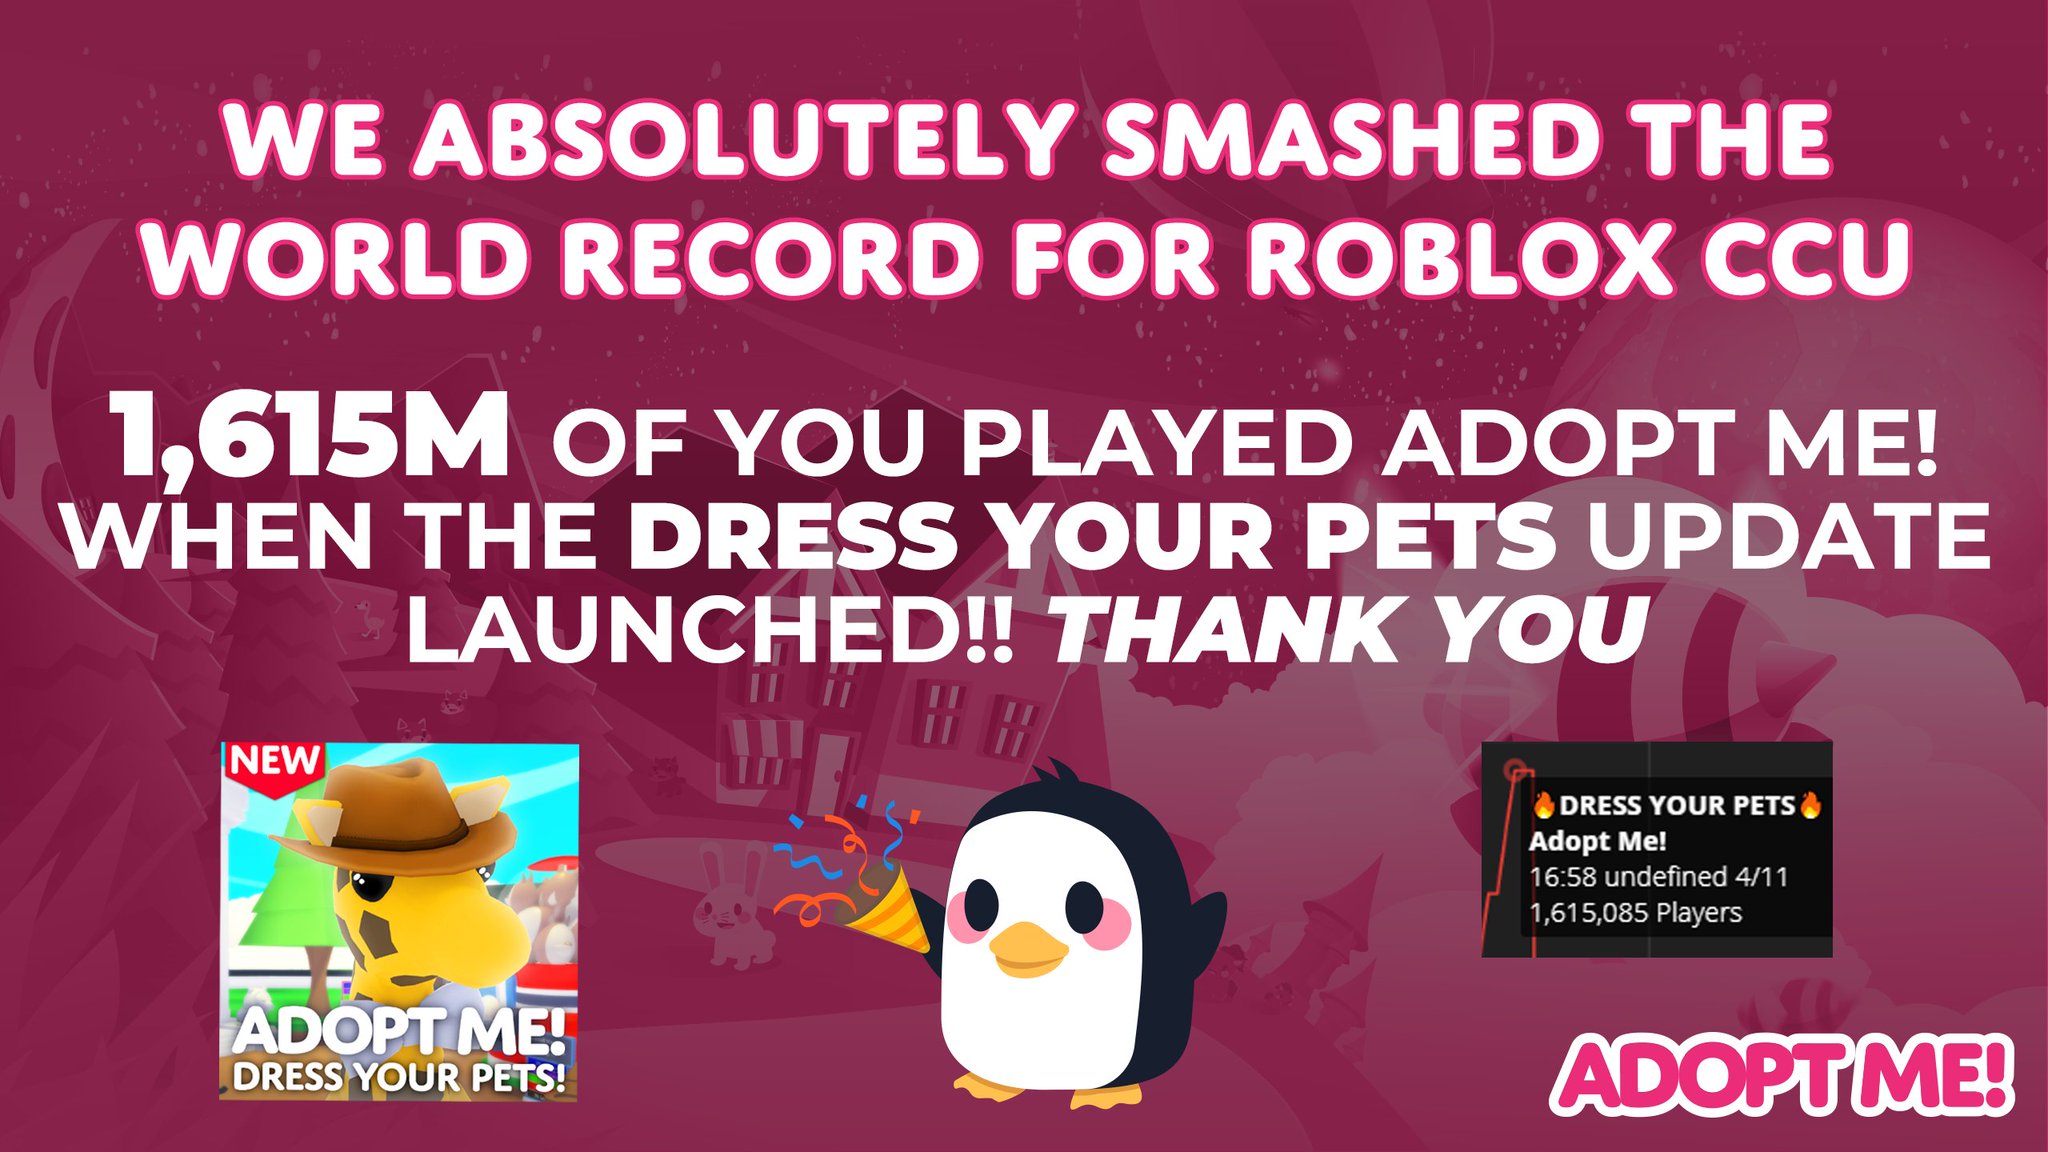 Adopt Me On Twitter The New World Record For Roblox Ccu Players Active Is 1 615 Million Players Thank You So Much For Tuning In To See The Live Event And Apologies - roblox adopt me app